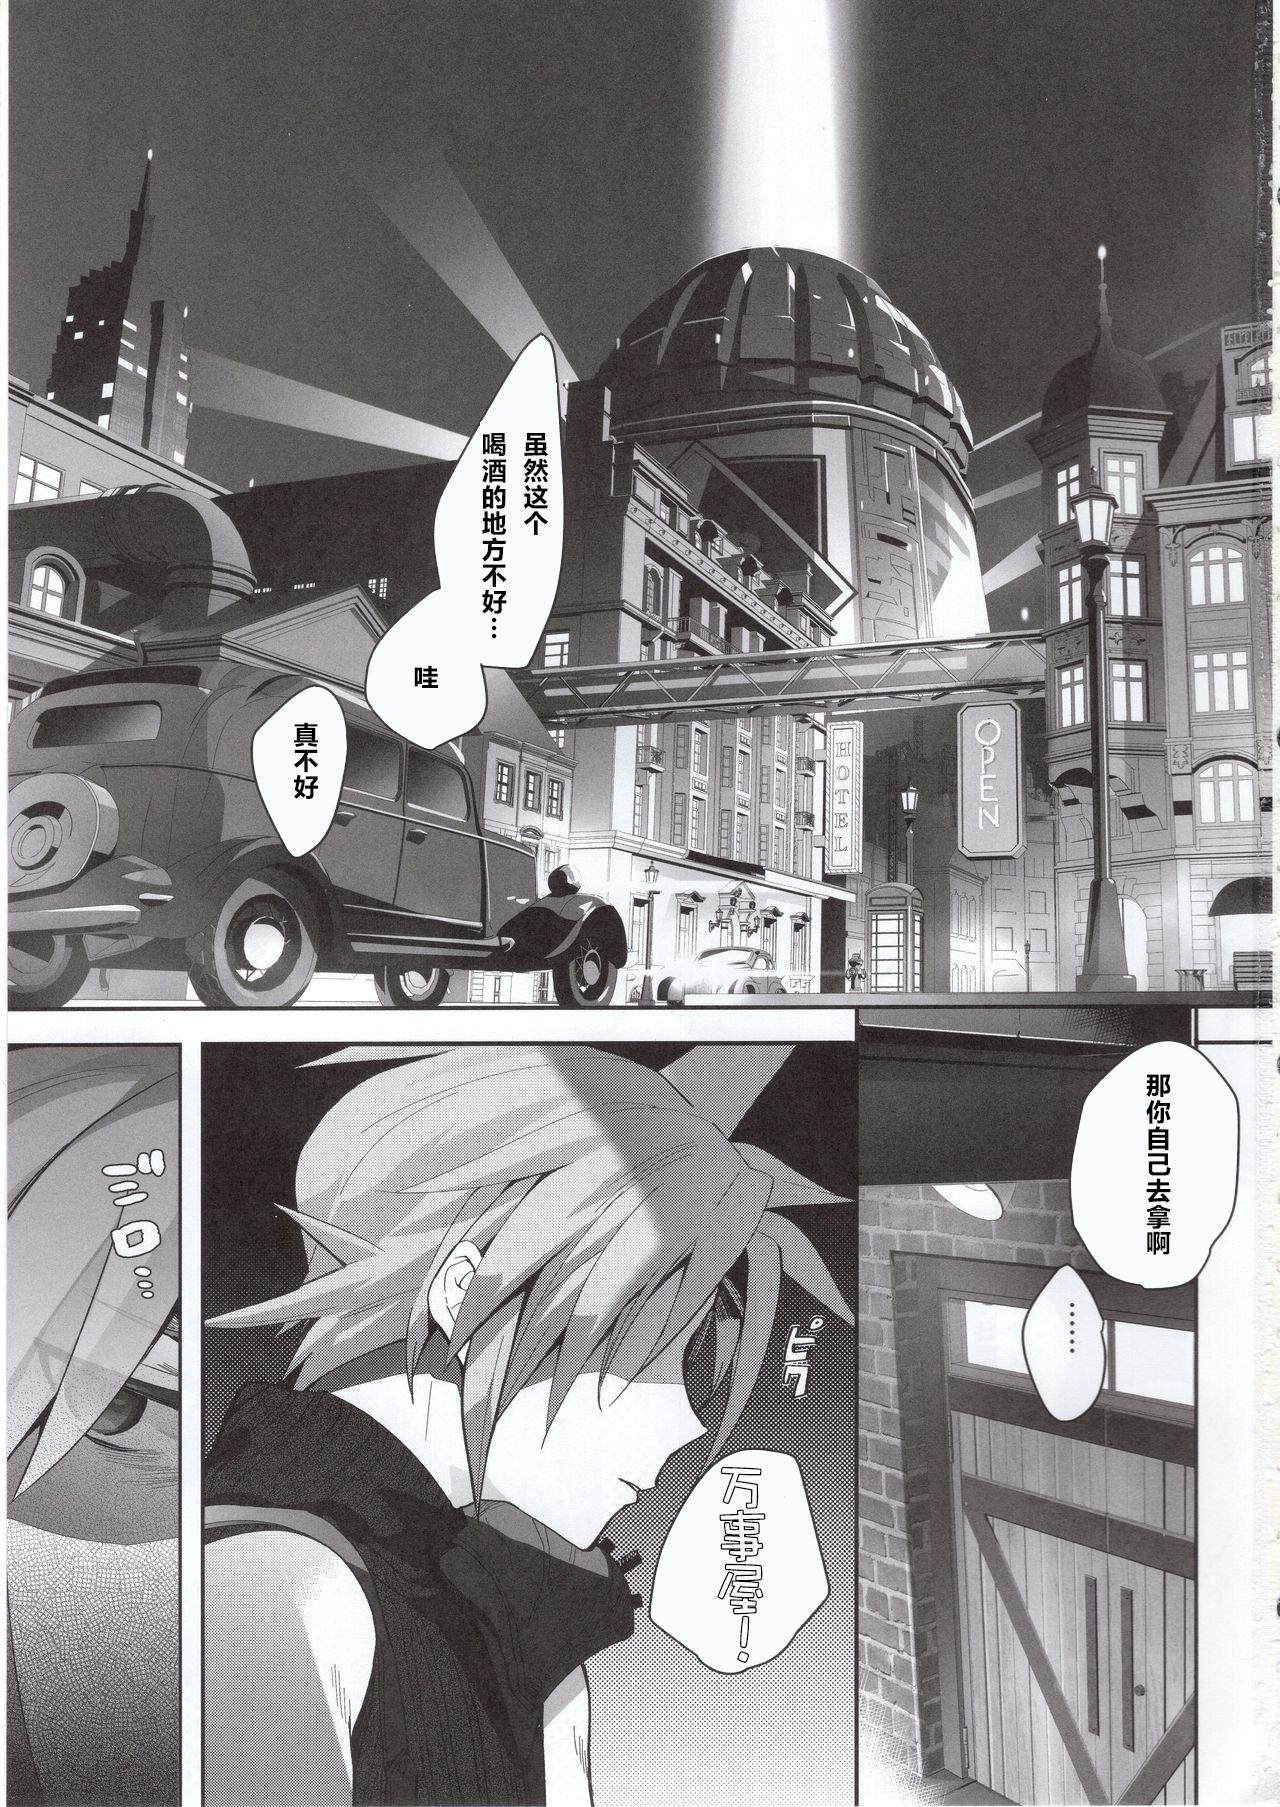 Amateur Tantalizing Two Gill - Final fantasy vii Awesome - Page 2